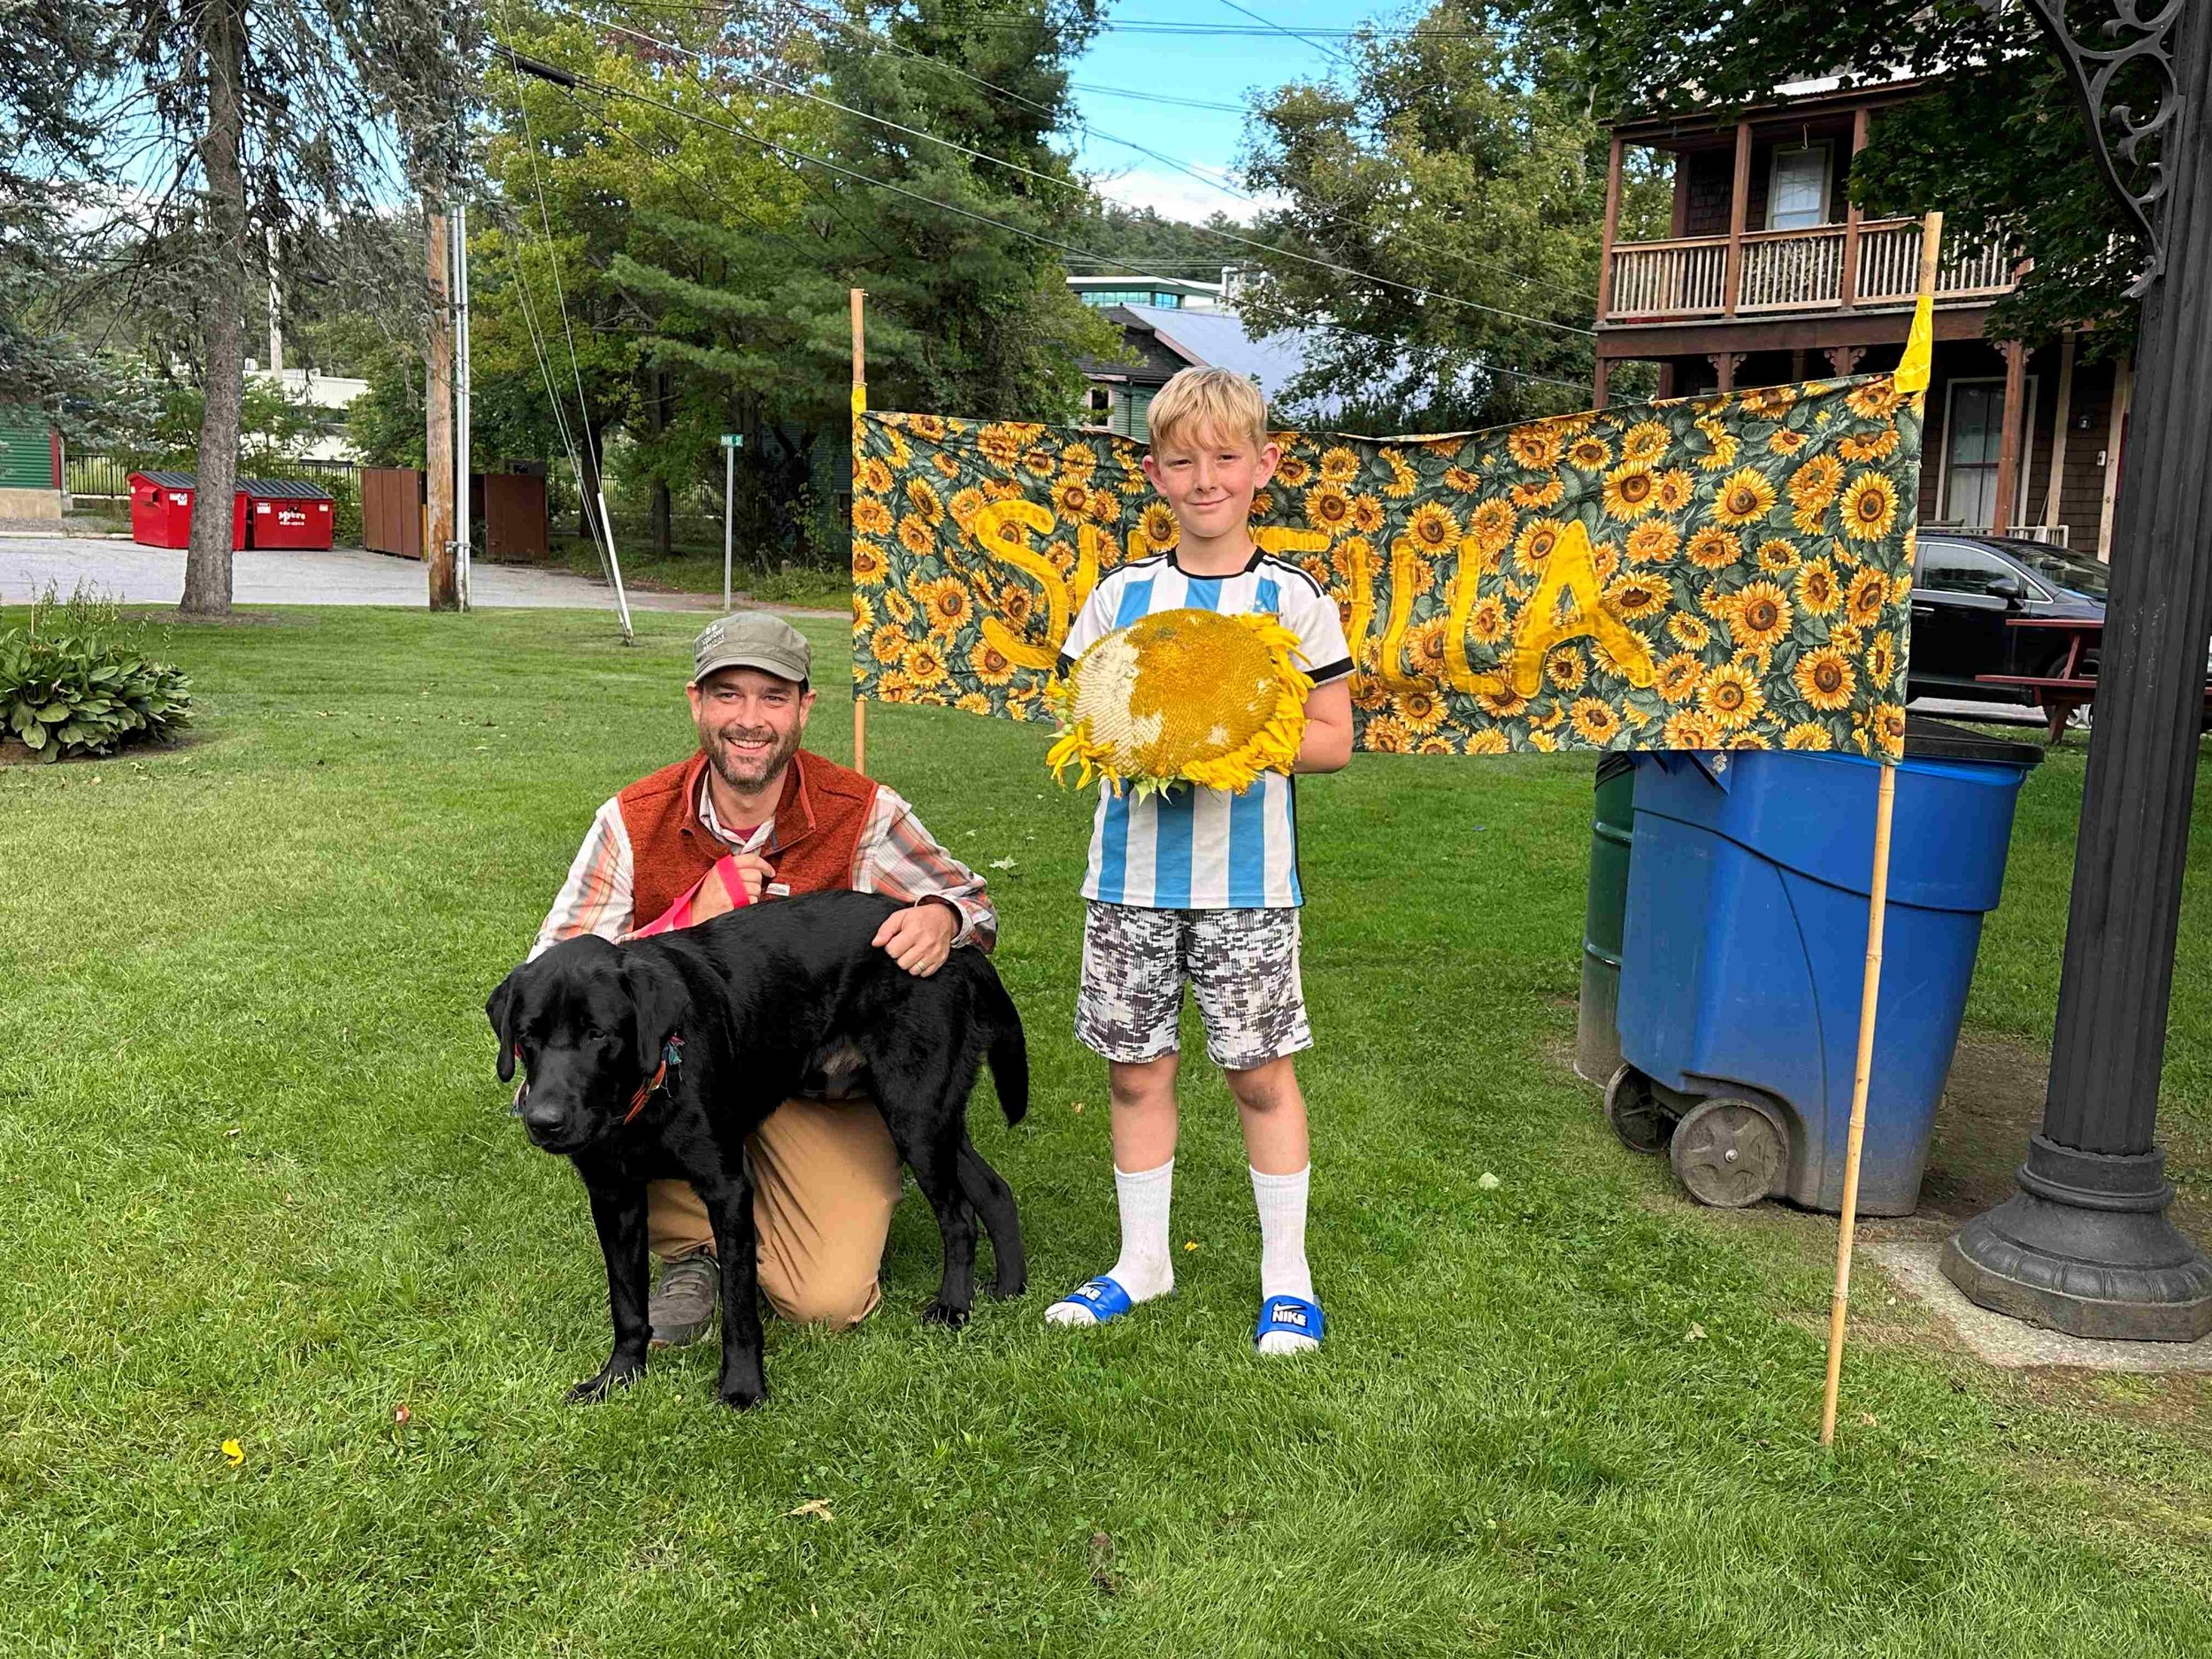  Alex Greiner (right) holds his winning flowerhead along with dad Edward and his black lab, Doug.  Photo by Lisa Scagliotti 